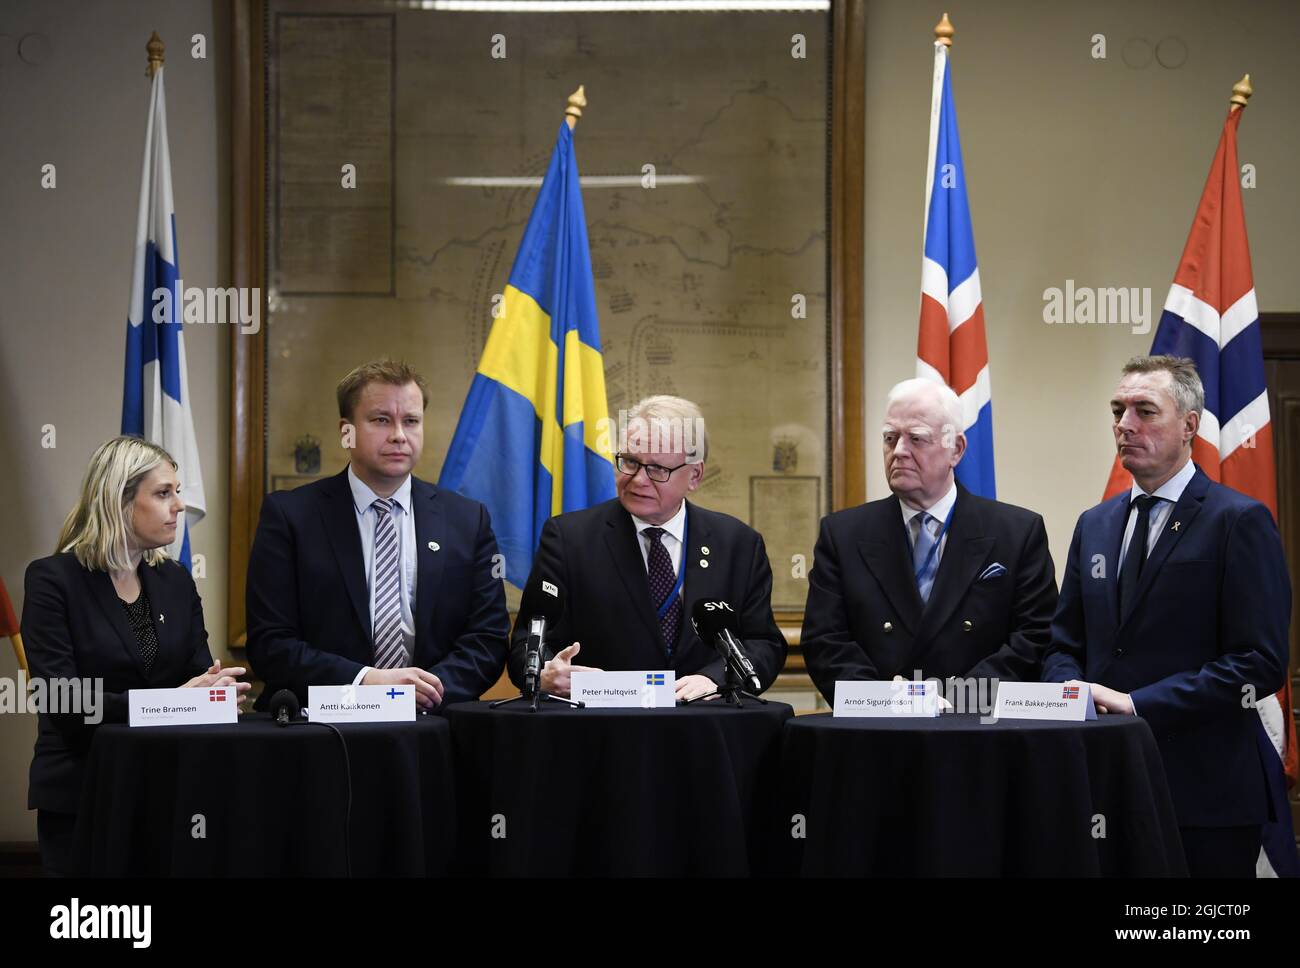 (L-R) Denmarkâ€™s Minister of Defence Trine Bramsen, Finlandâ€™s Minister of Defence Antti Kaikkonen, Sweden's Minister of Defence Peter Hultqvist, Director General of the Defence Directorate at Icelandâ€™s Ministry for Foreign Affairs ArnÃ³r SigurjÃ³nsson and Norwayâ€™s Minister of Defence Frank Bakke-Jensen during a press conference in connection with the Nordic defence minister meeting within the framework of the common Nordic Defence Cooperation (NORDEFCO) held in Stockholm, Sweden November 19, 2019. Photo: Pontus Lundahl / TT kod 10050  Stock Photo